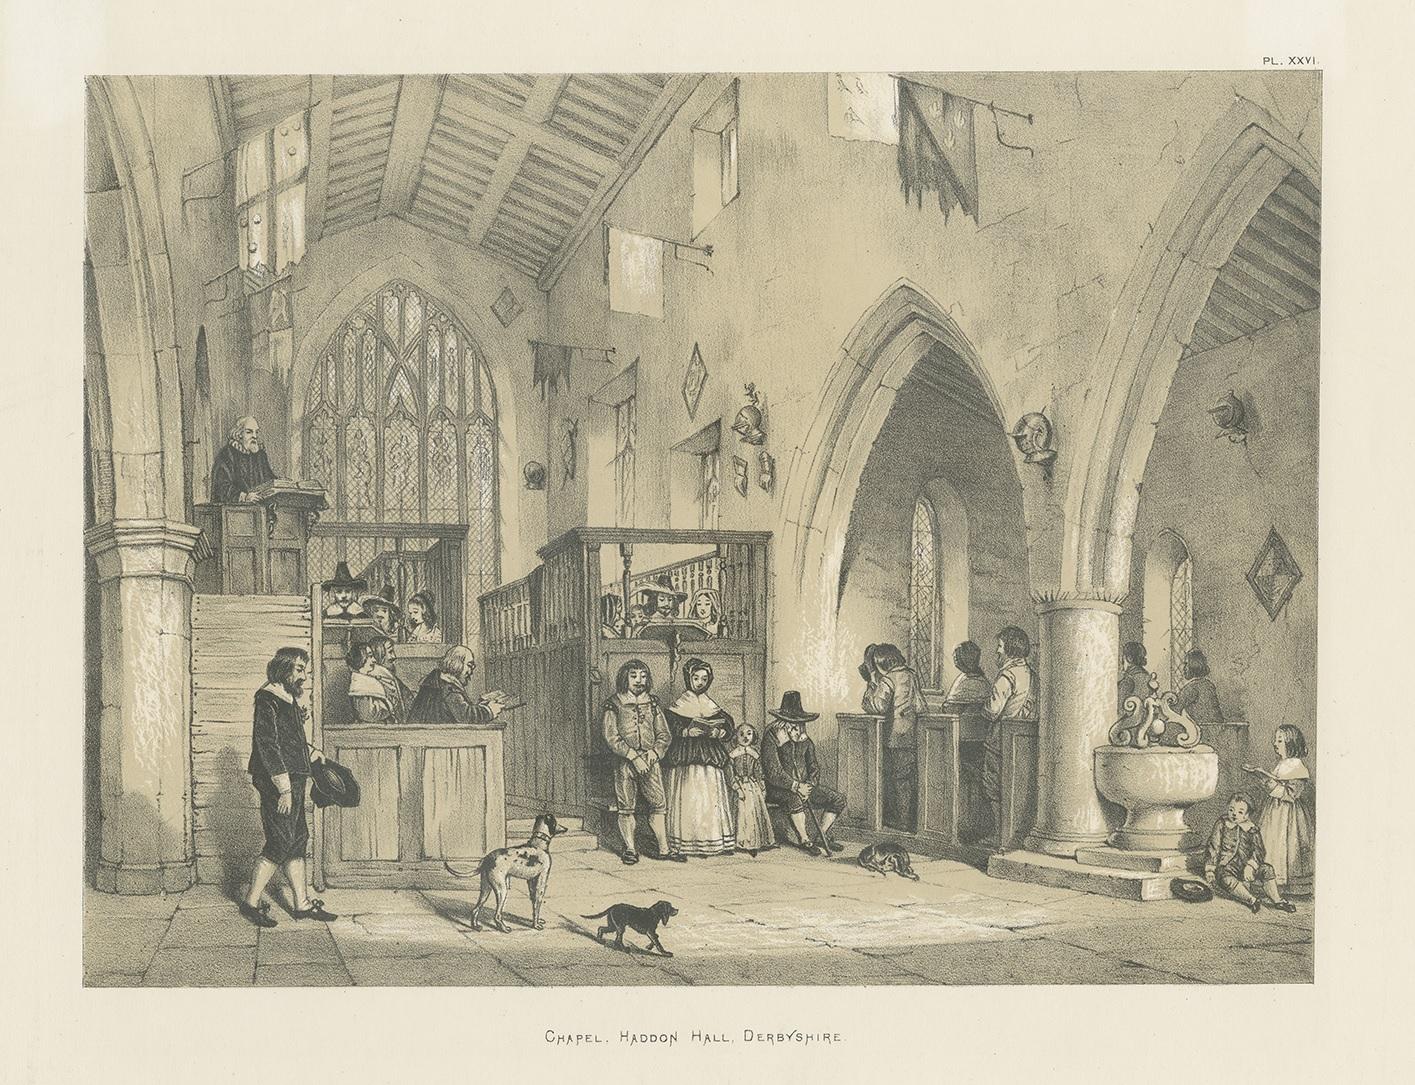 Antique print titled 'Chapel. Haddon Hall. Derbyshire'. Lithograph of the chapel of Haddon Hall. Haddon Hall is an English country house on the River Wye near Bakewell, Derbyshire, a former seat of the Dukes of Rutland. This print originates from